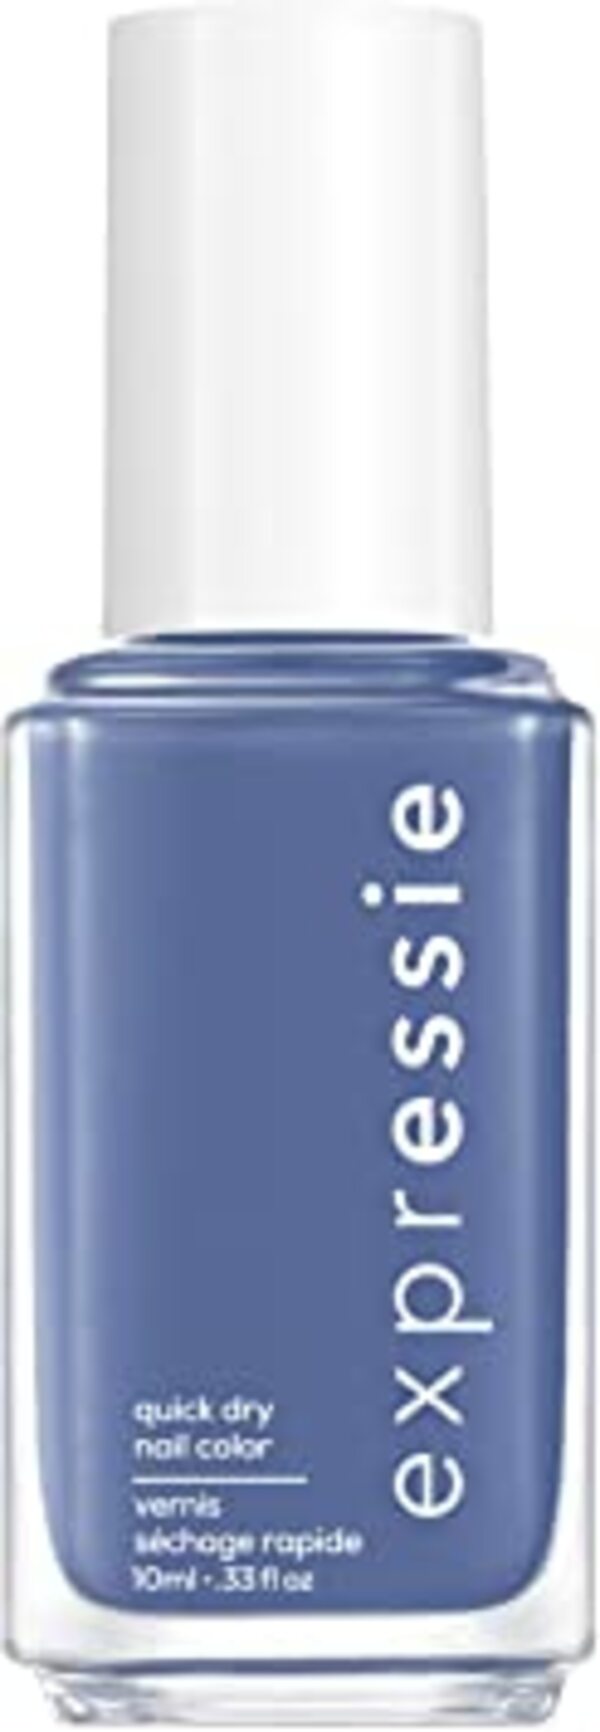 Nail polish swatch / manicure of shade essie Lose the snooze